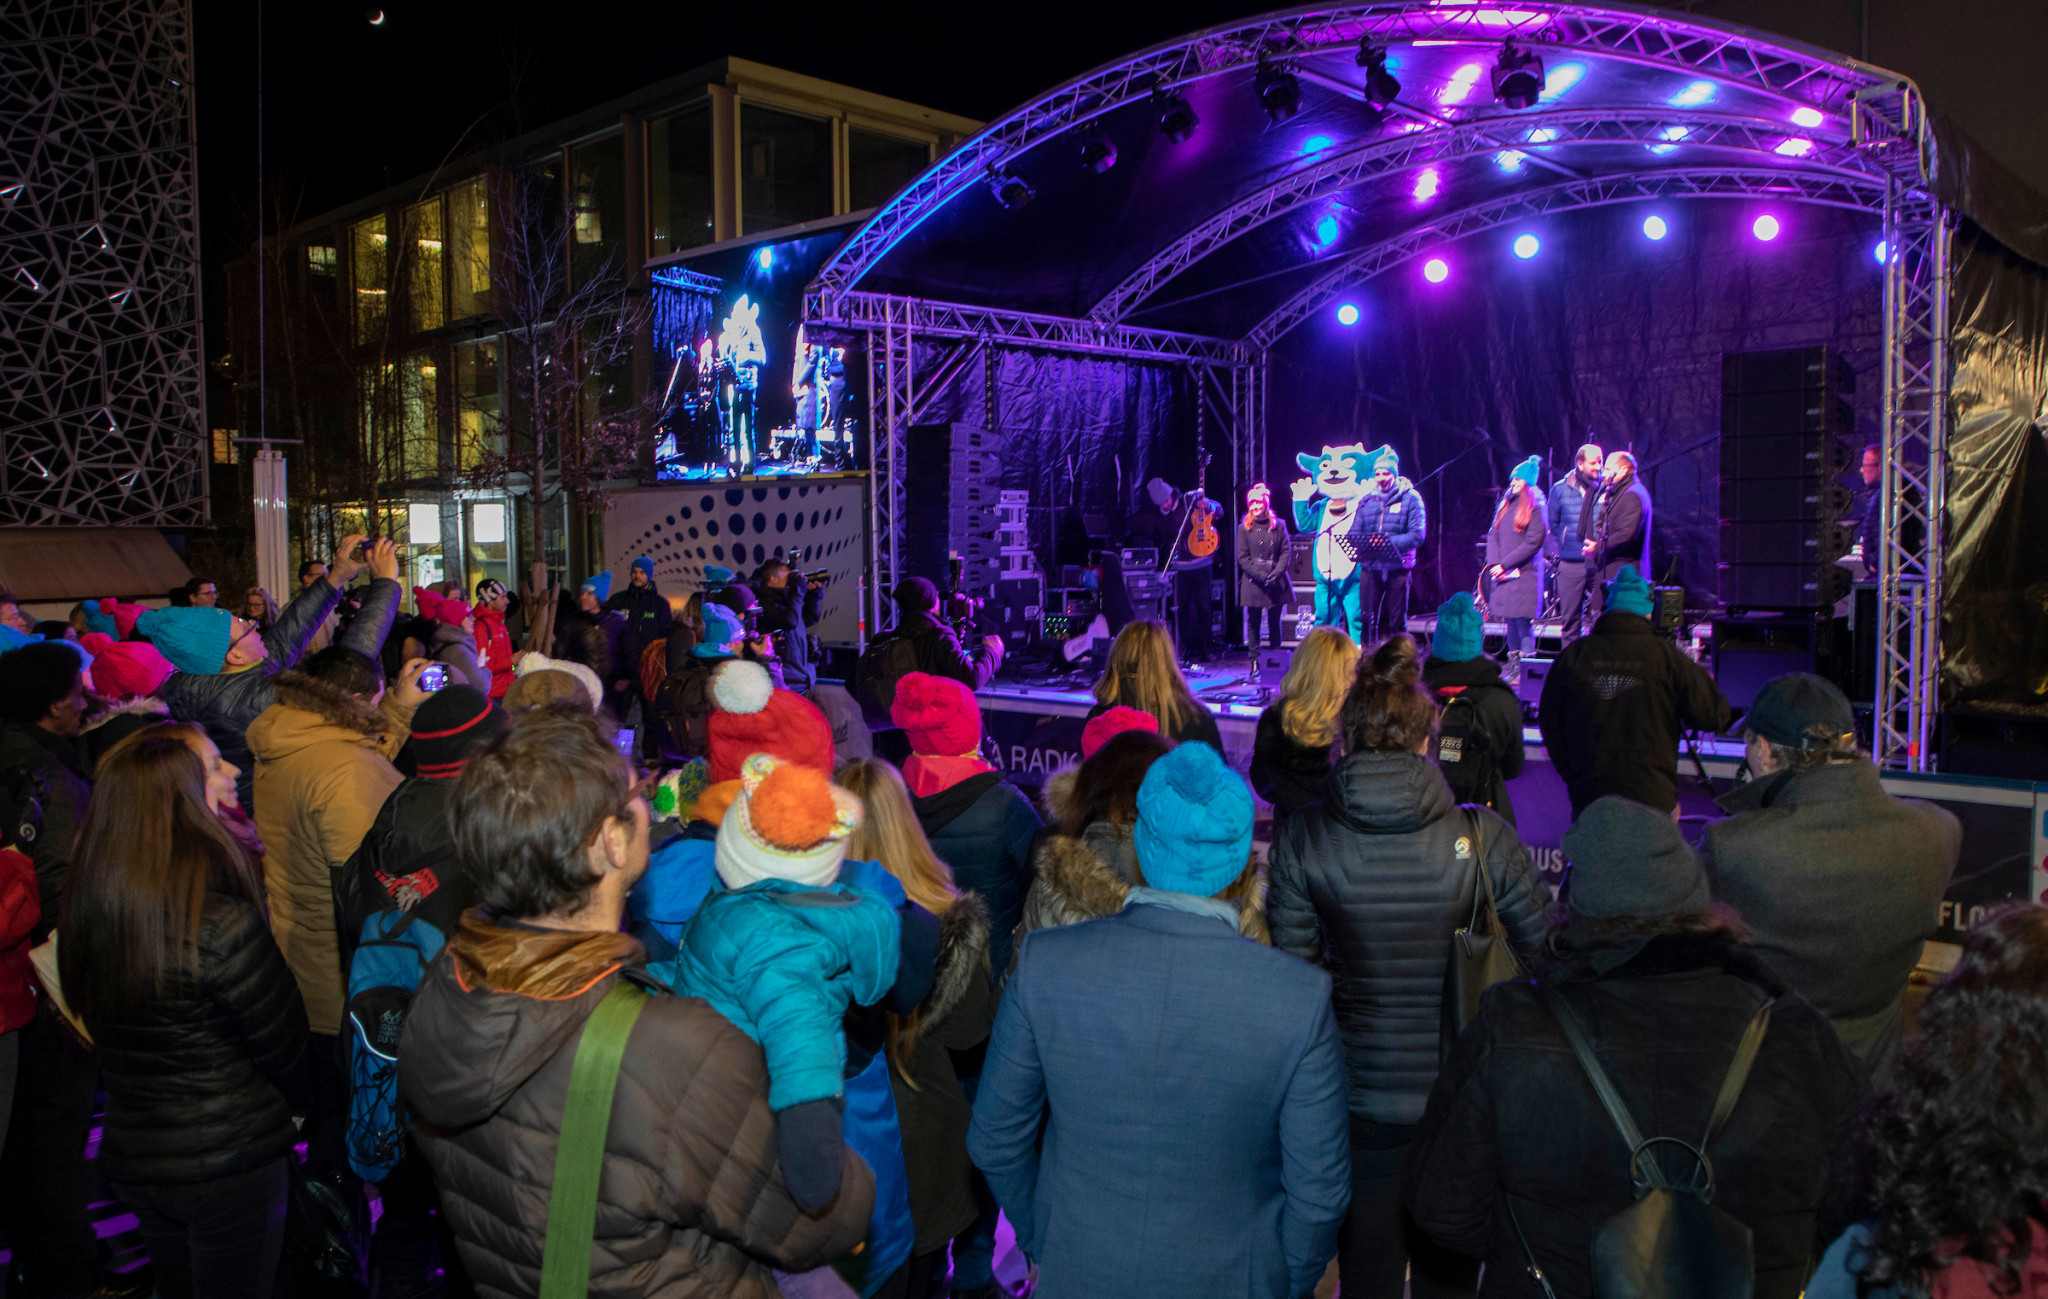 The event was held on the medal plaza for the Lausanne 2020 Winter Youth Olympic Games ©IOC